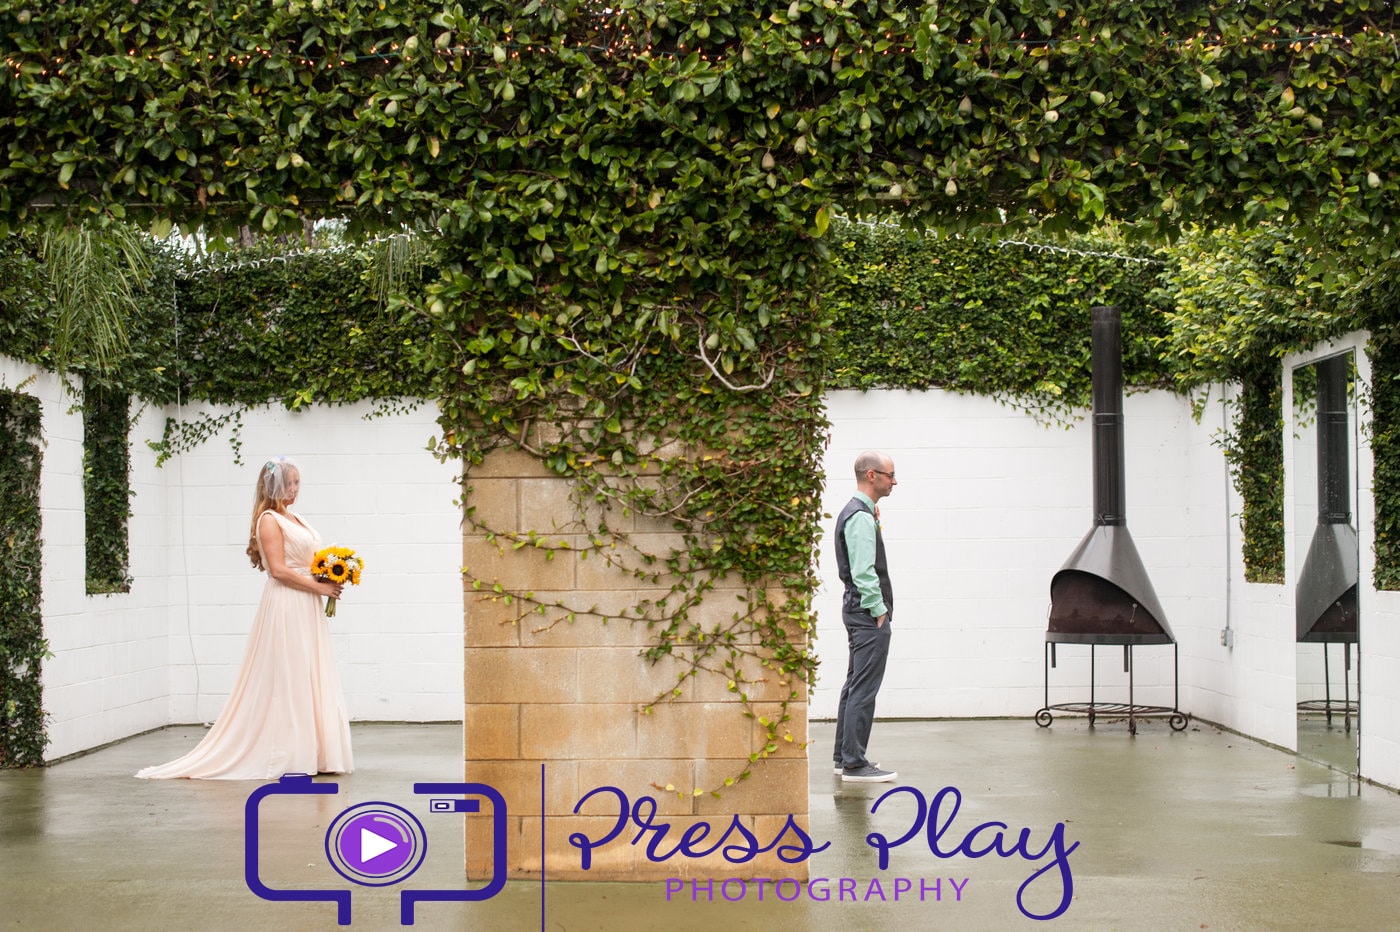 Press Play Entertainment - bride and groom in vine covered roofless courtyard for first look